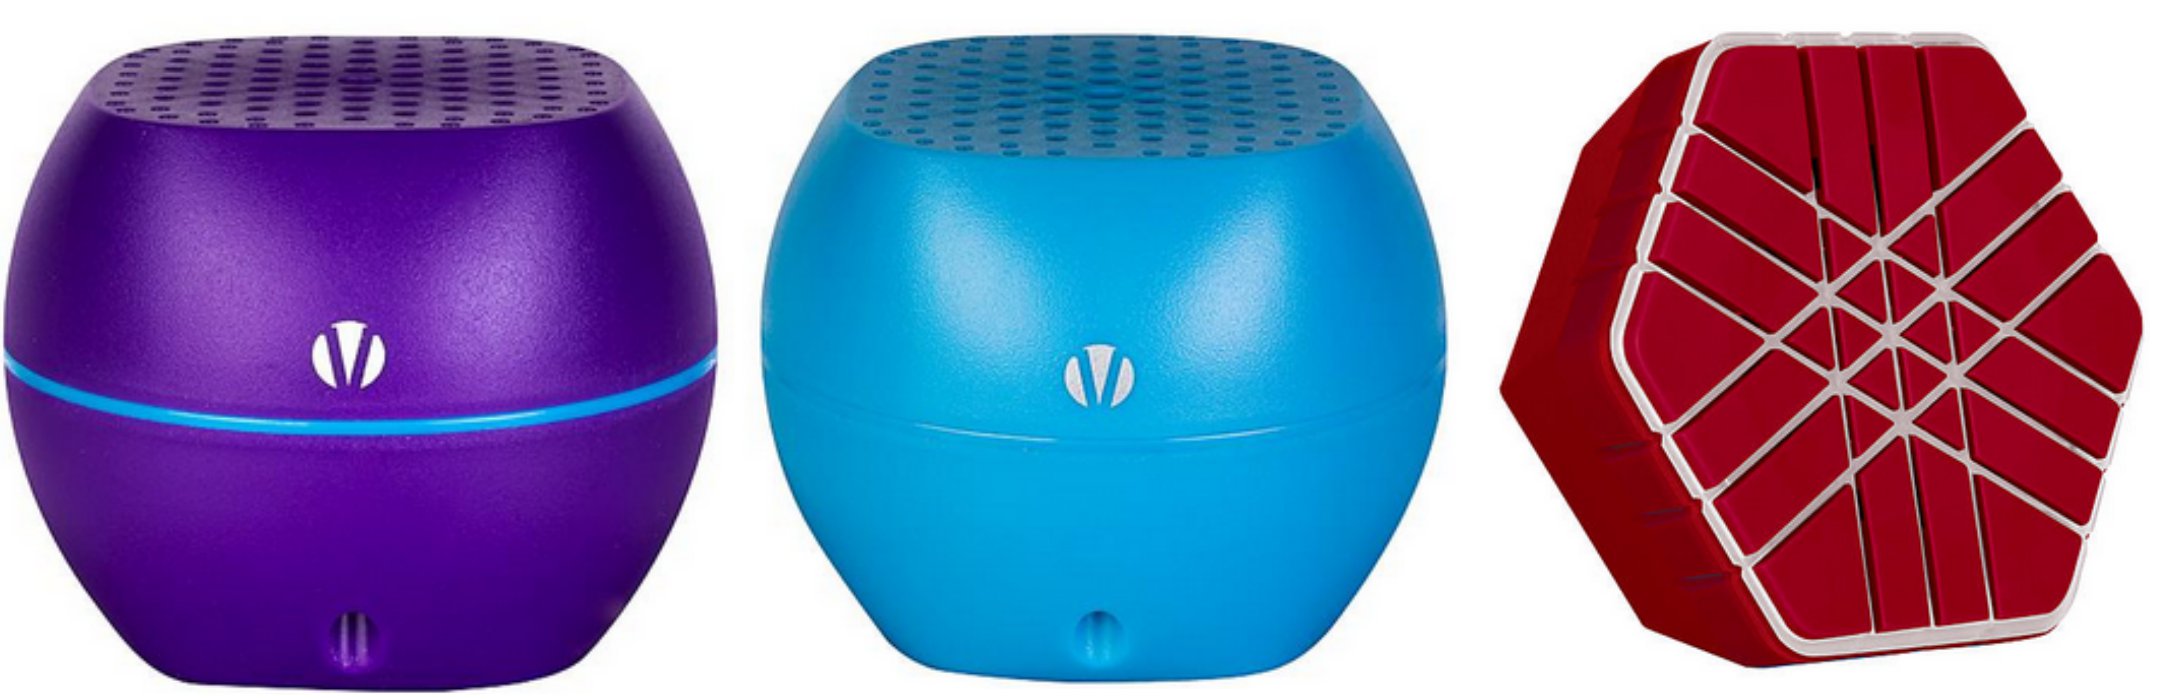 Sears.com: Possibly FREE Vivitar Bluetooth Speakers (After ...